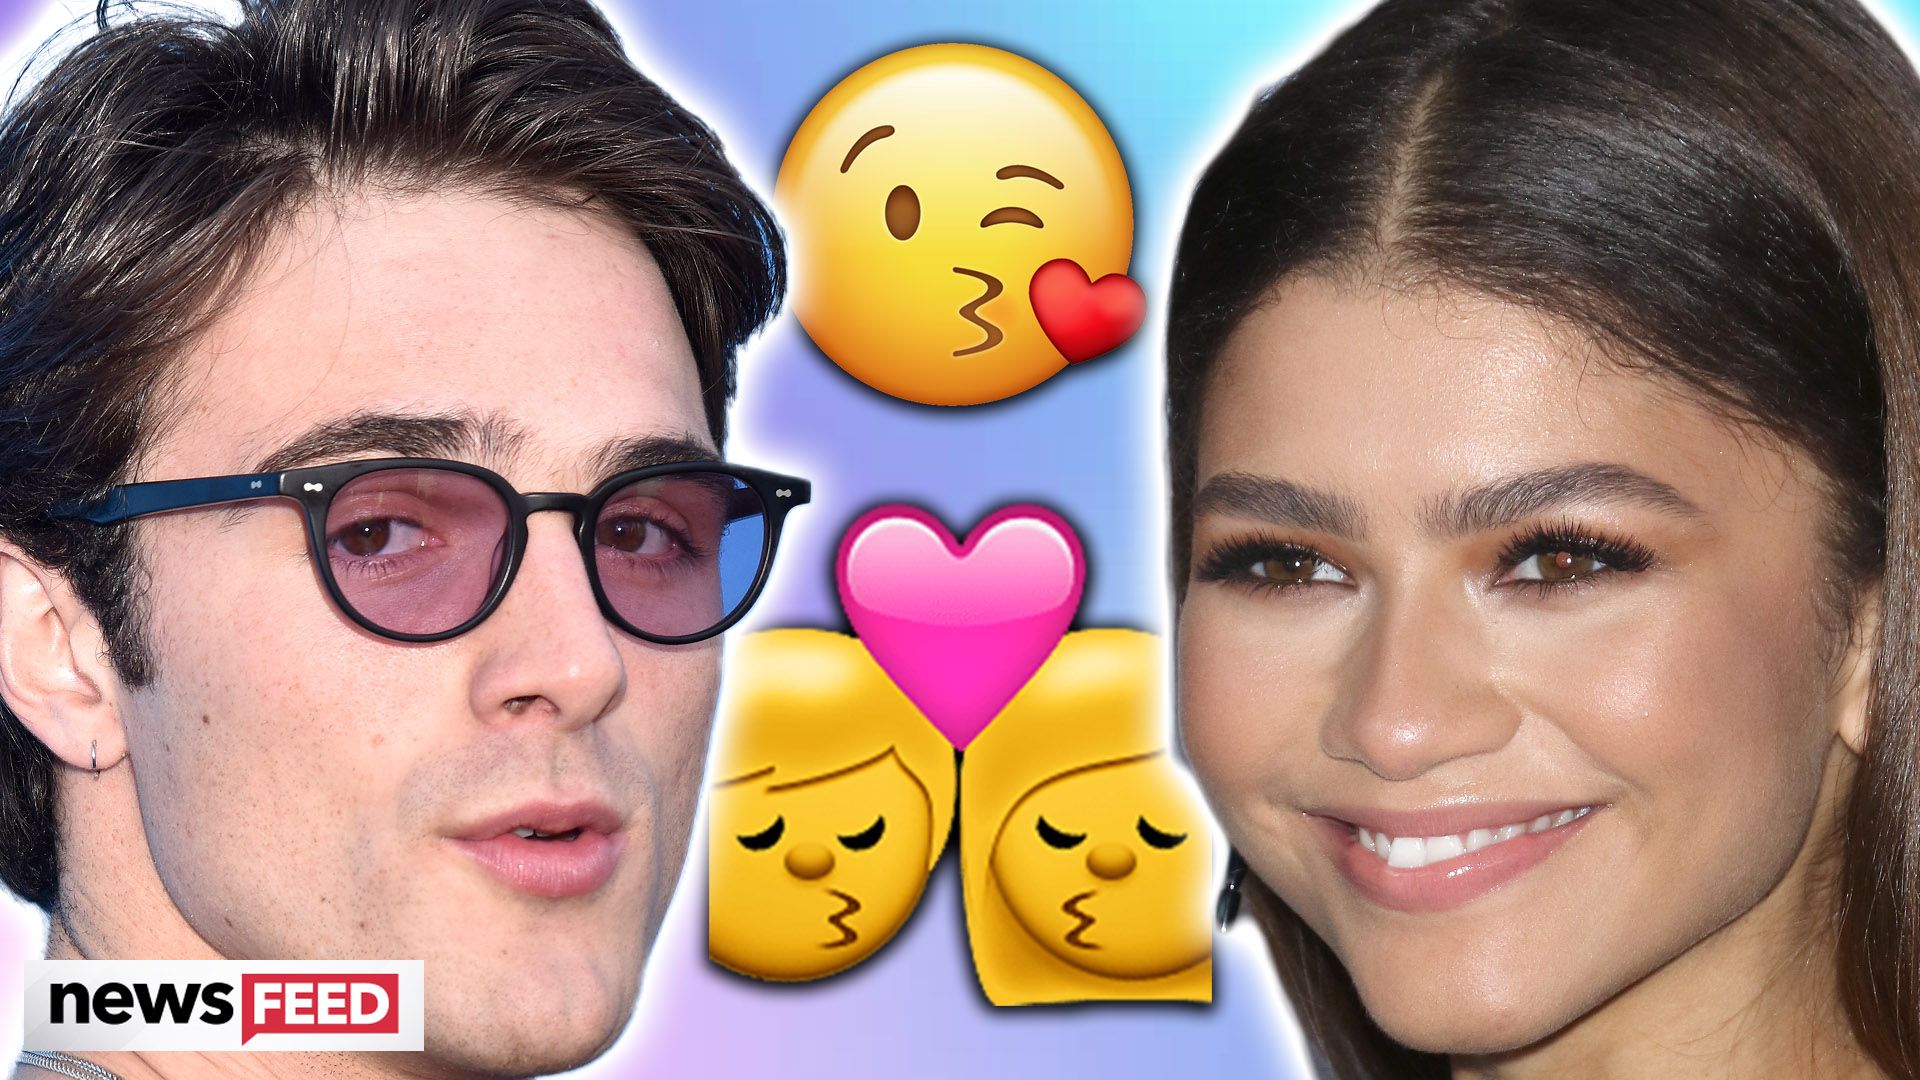 Zendaya and Jacob Elordi Are Spotted Together at the Sydney Airport